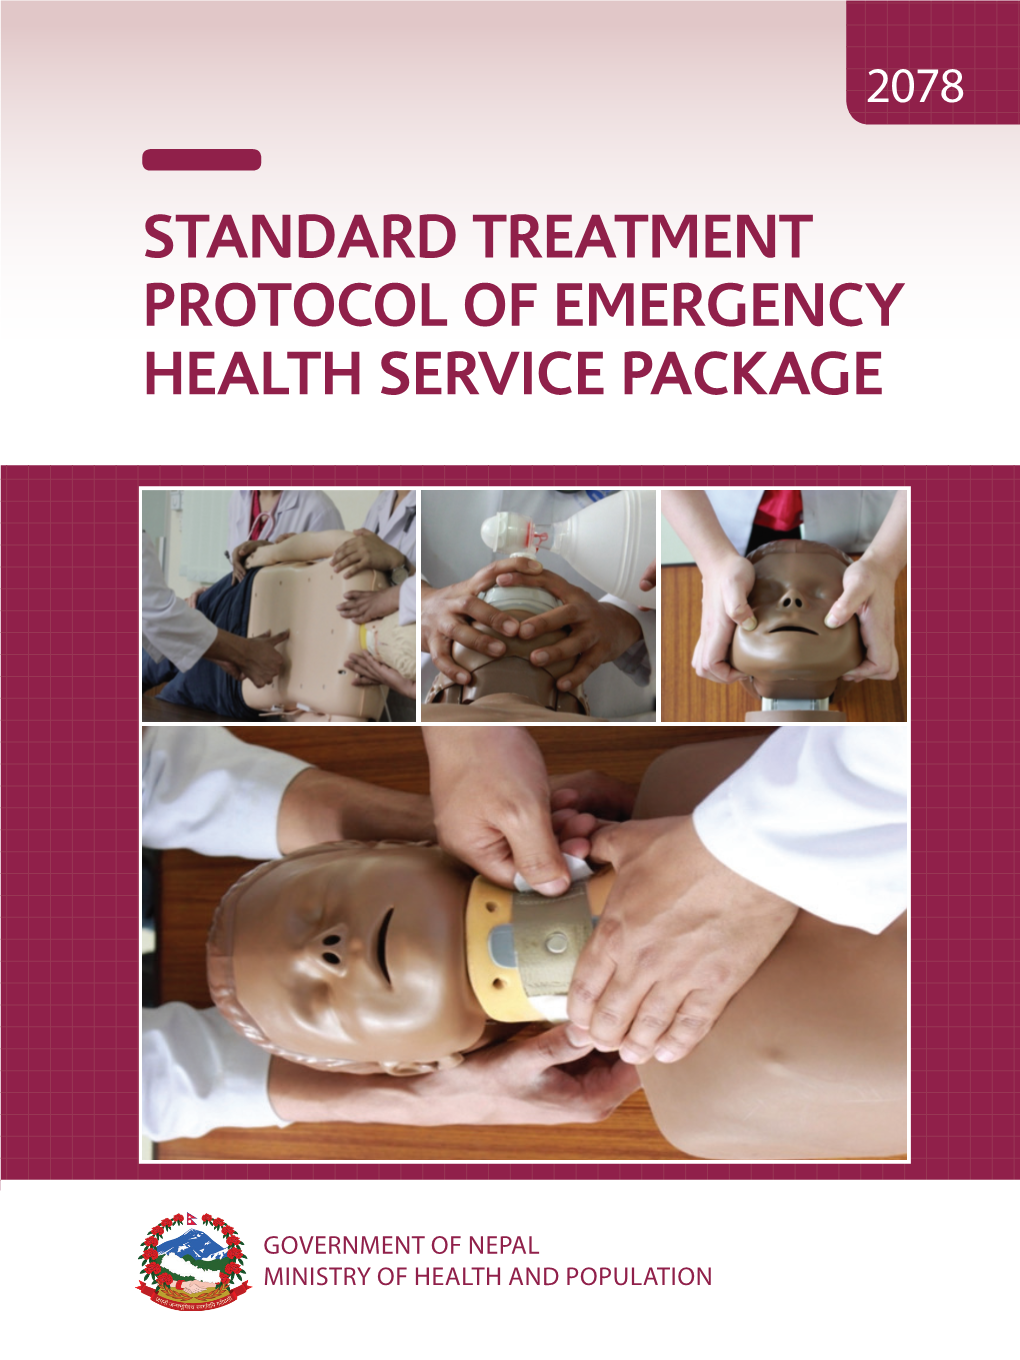 Standard Treatment Protocol of Emergency Health Service Package